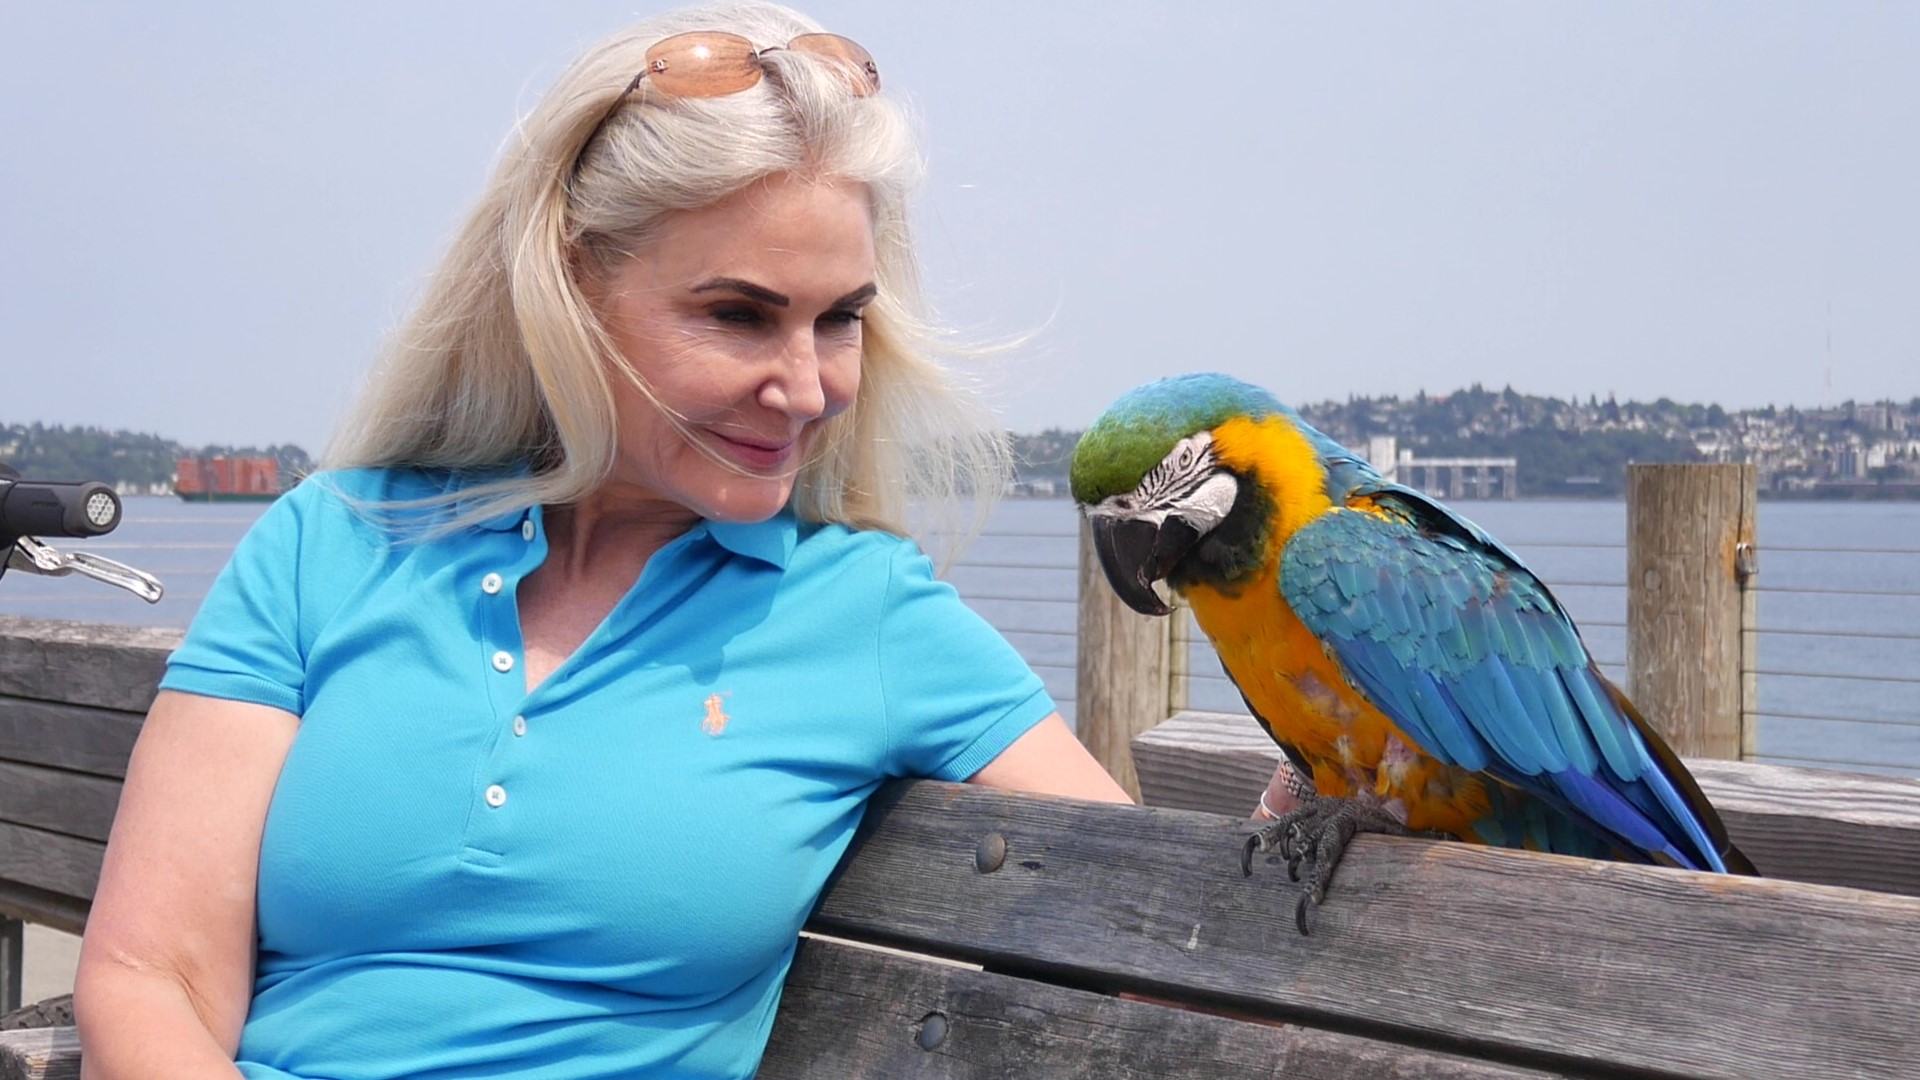 Mary Gringo started biking around West Seattle with her macaw, Lago, during the pandemic — and Lago now has hundreds of fans. #k5evening